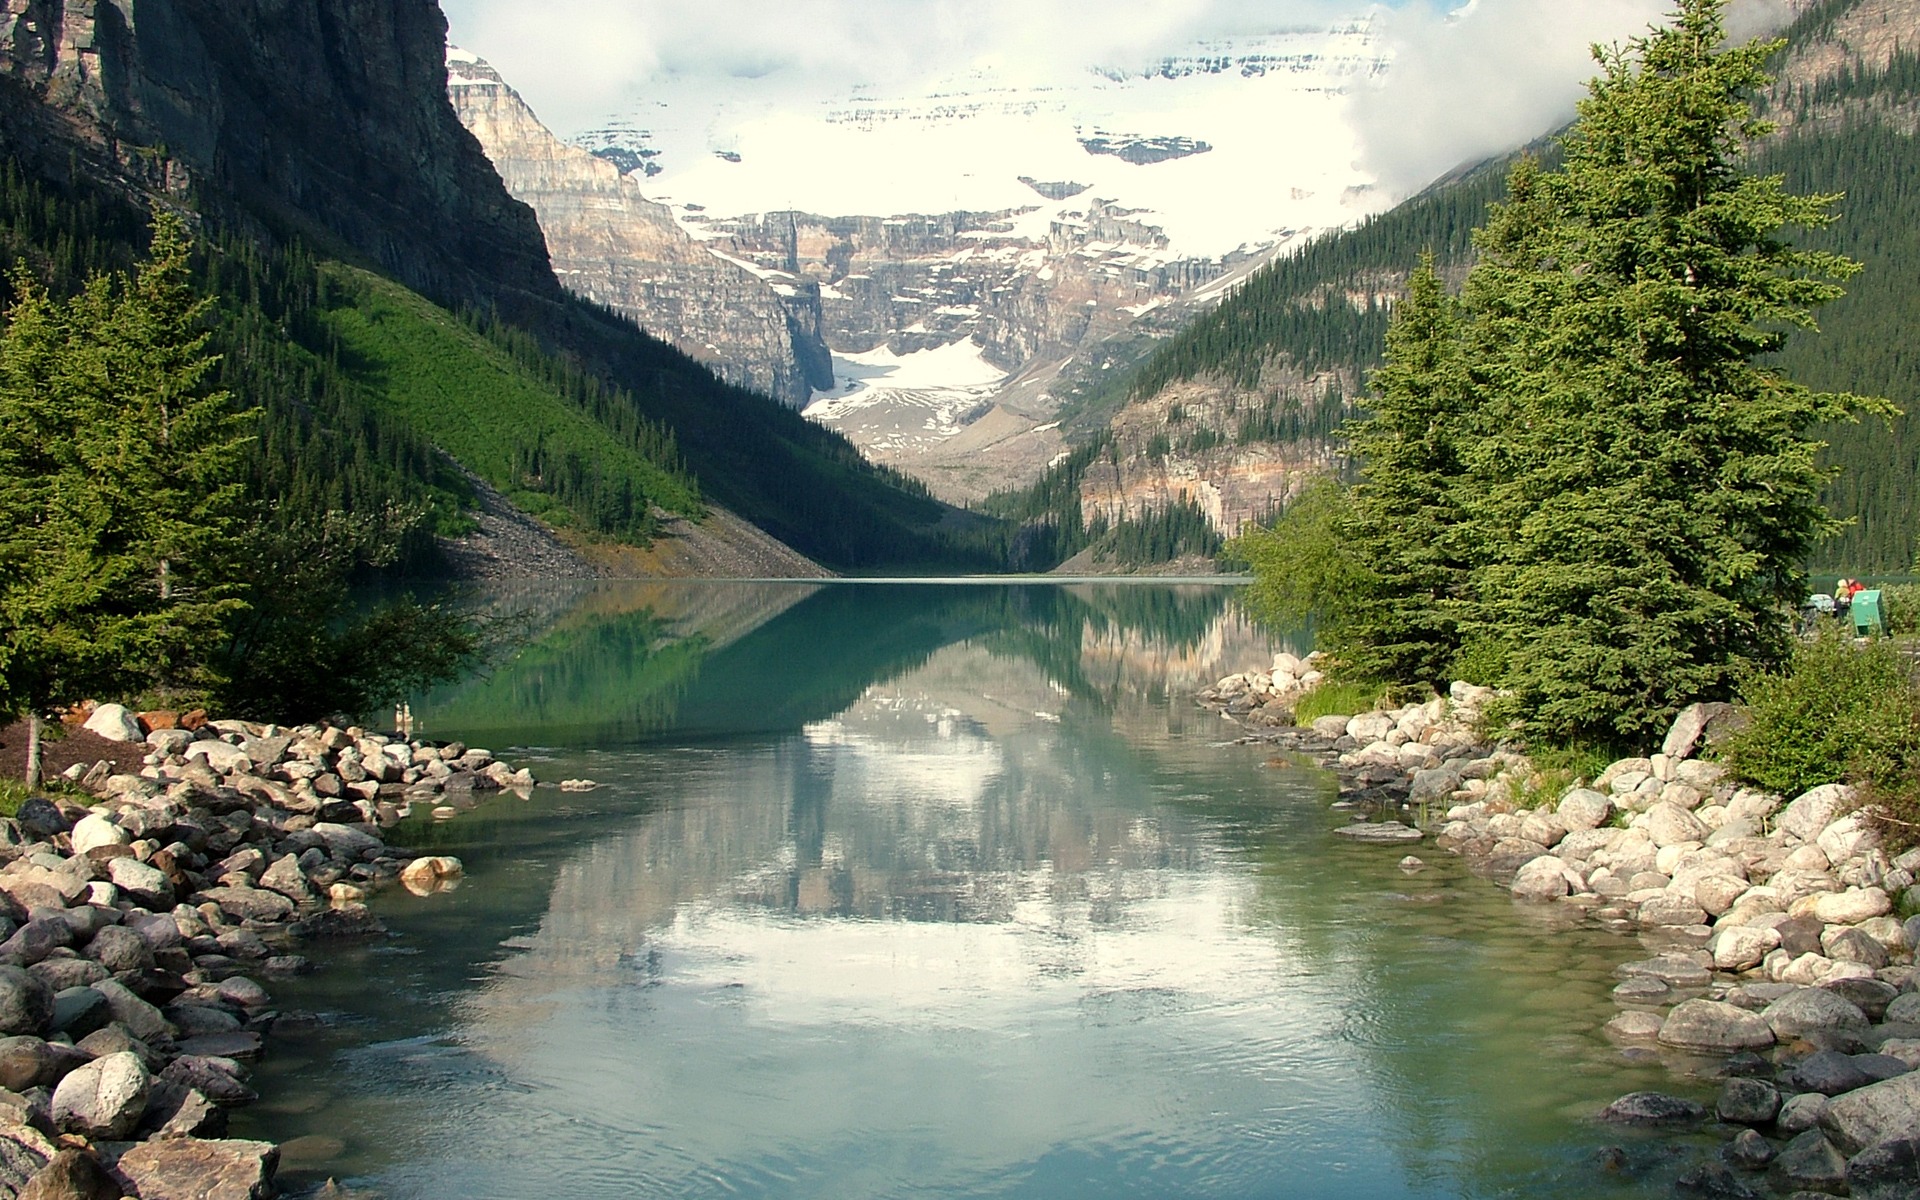 Lake Louise Wallpaper Landscape Nature Wallpapers in jpg format for